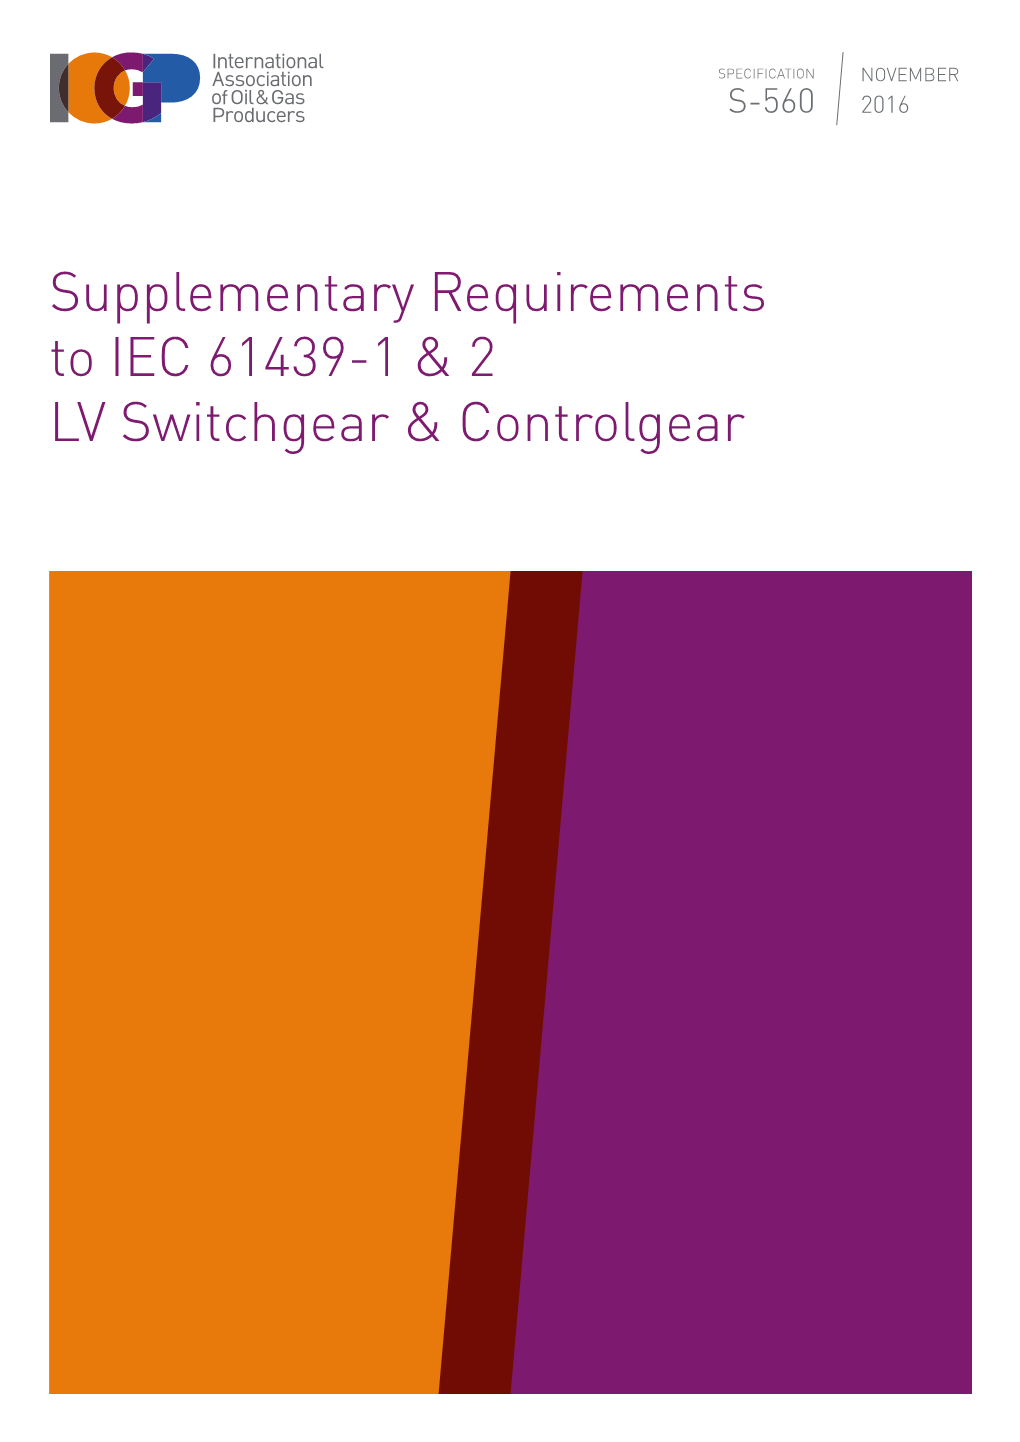 Supplementary Requirements to IEC 61439-1 & 2 LV Switchgear